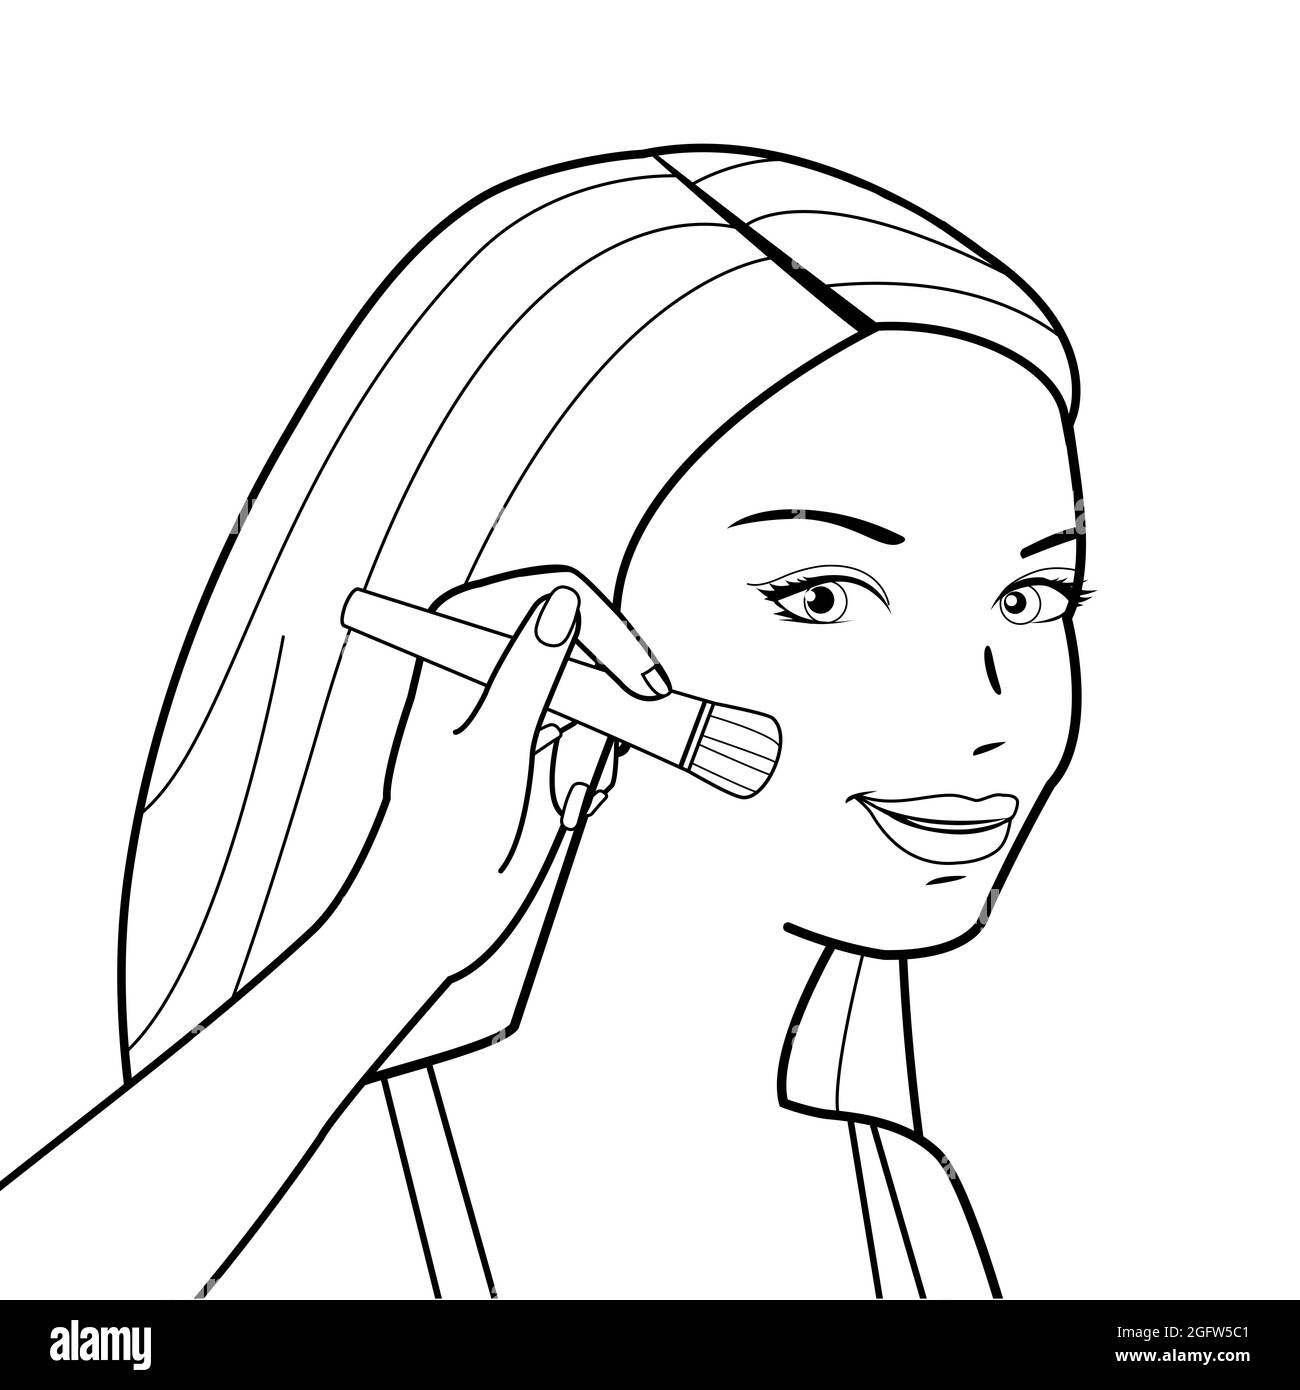 Woman applies blush on her cheeks. Black and white coloring page. Stock Photo